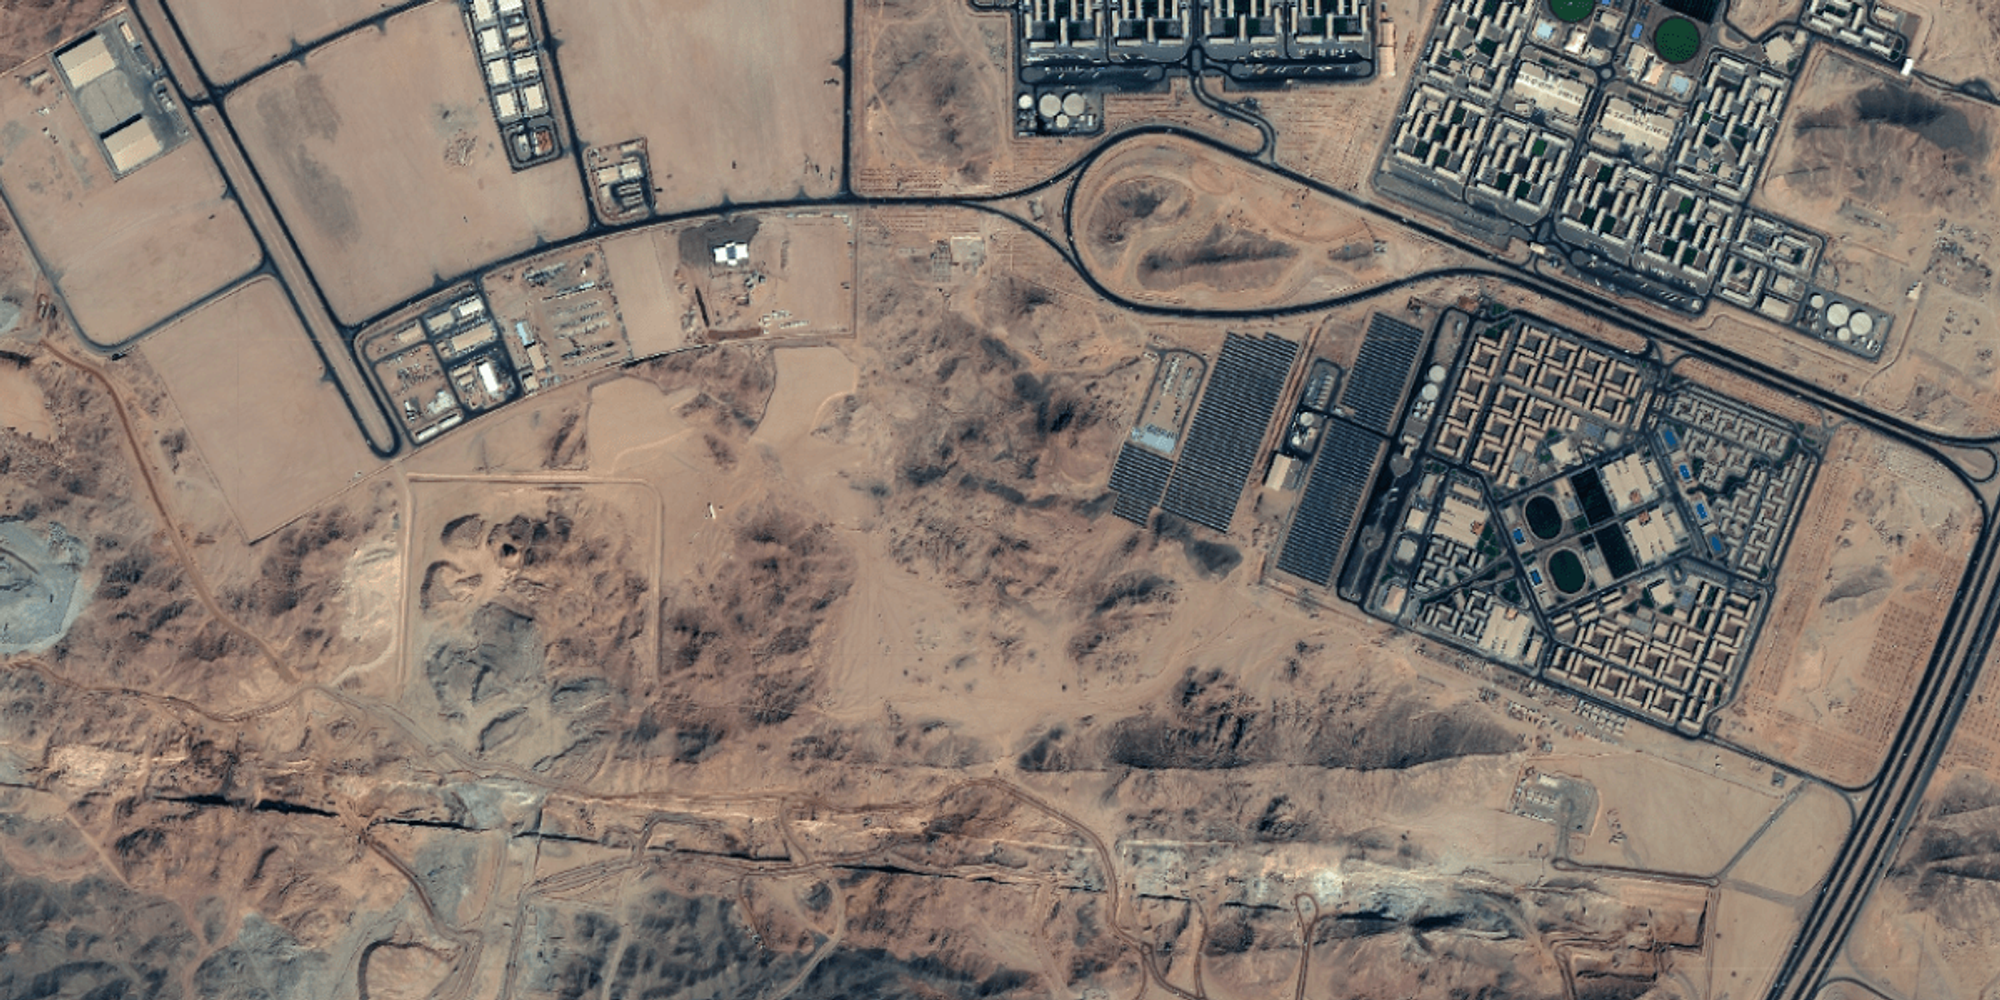 These exclusive satellite images show that Saudi Arabia's sci-fi megacity is well underway